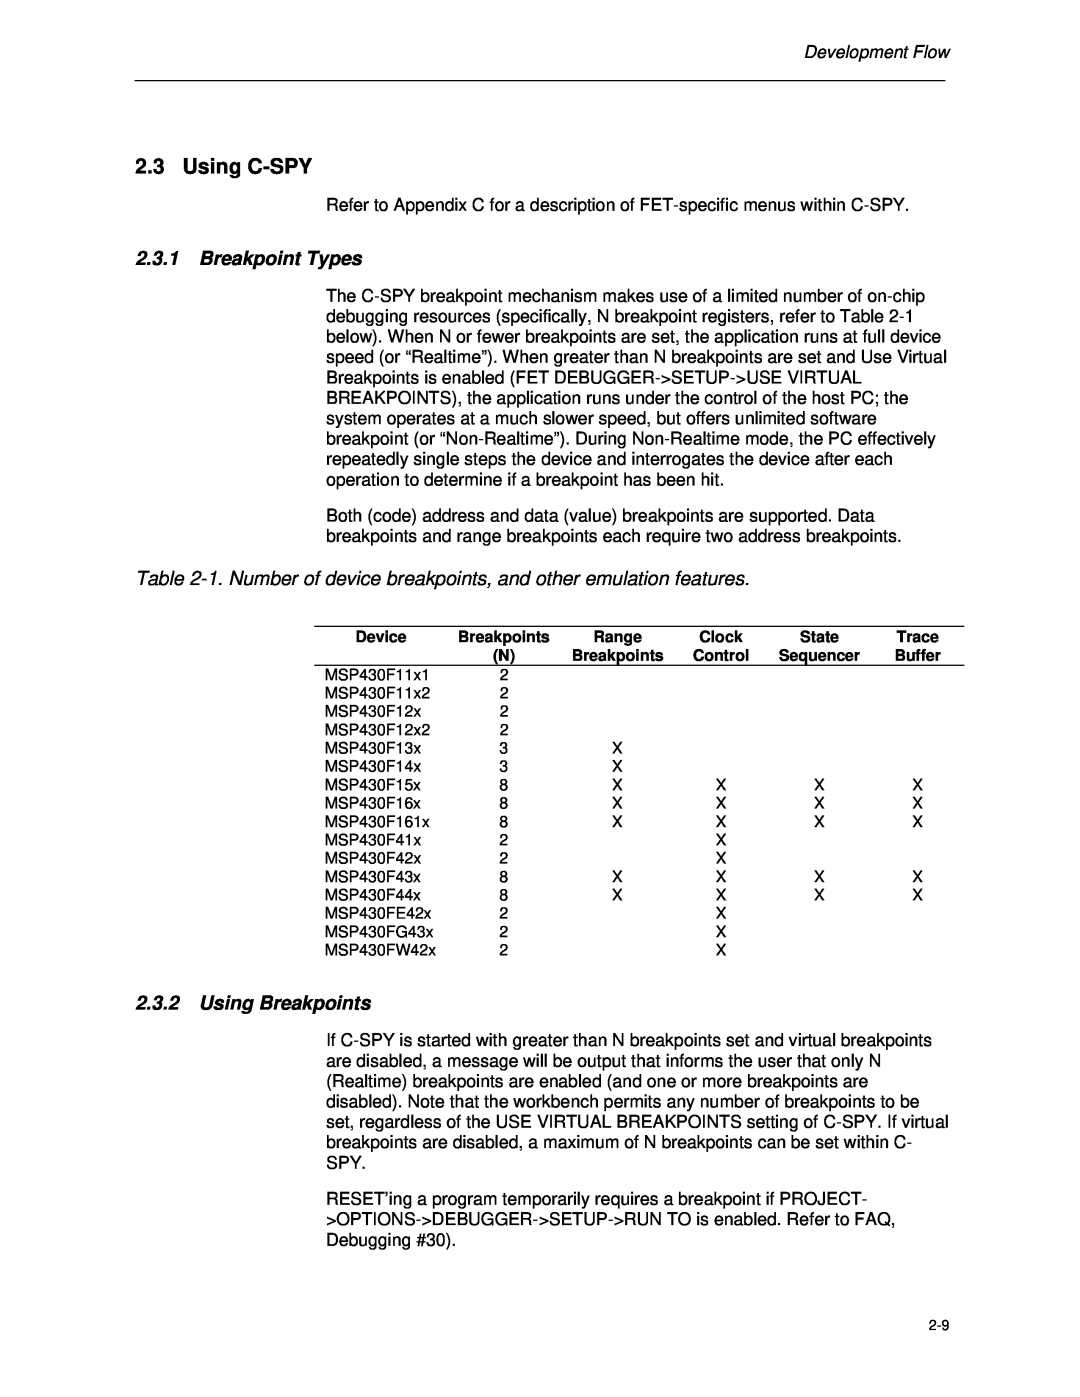 Texas Instruments MSP-FET430 Using C-SPY, Breakpoint Types, 1. Number of device breakpoints, and other emulation features 